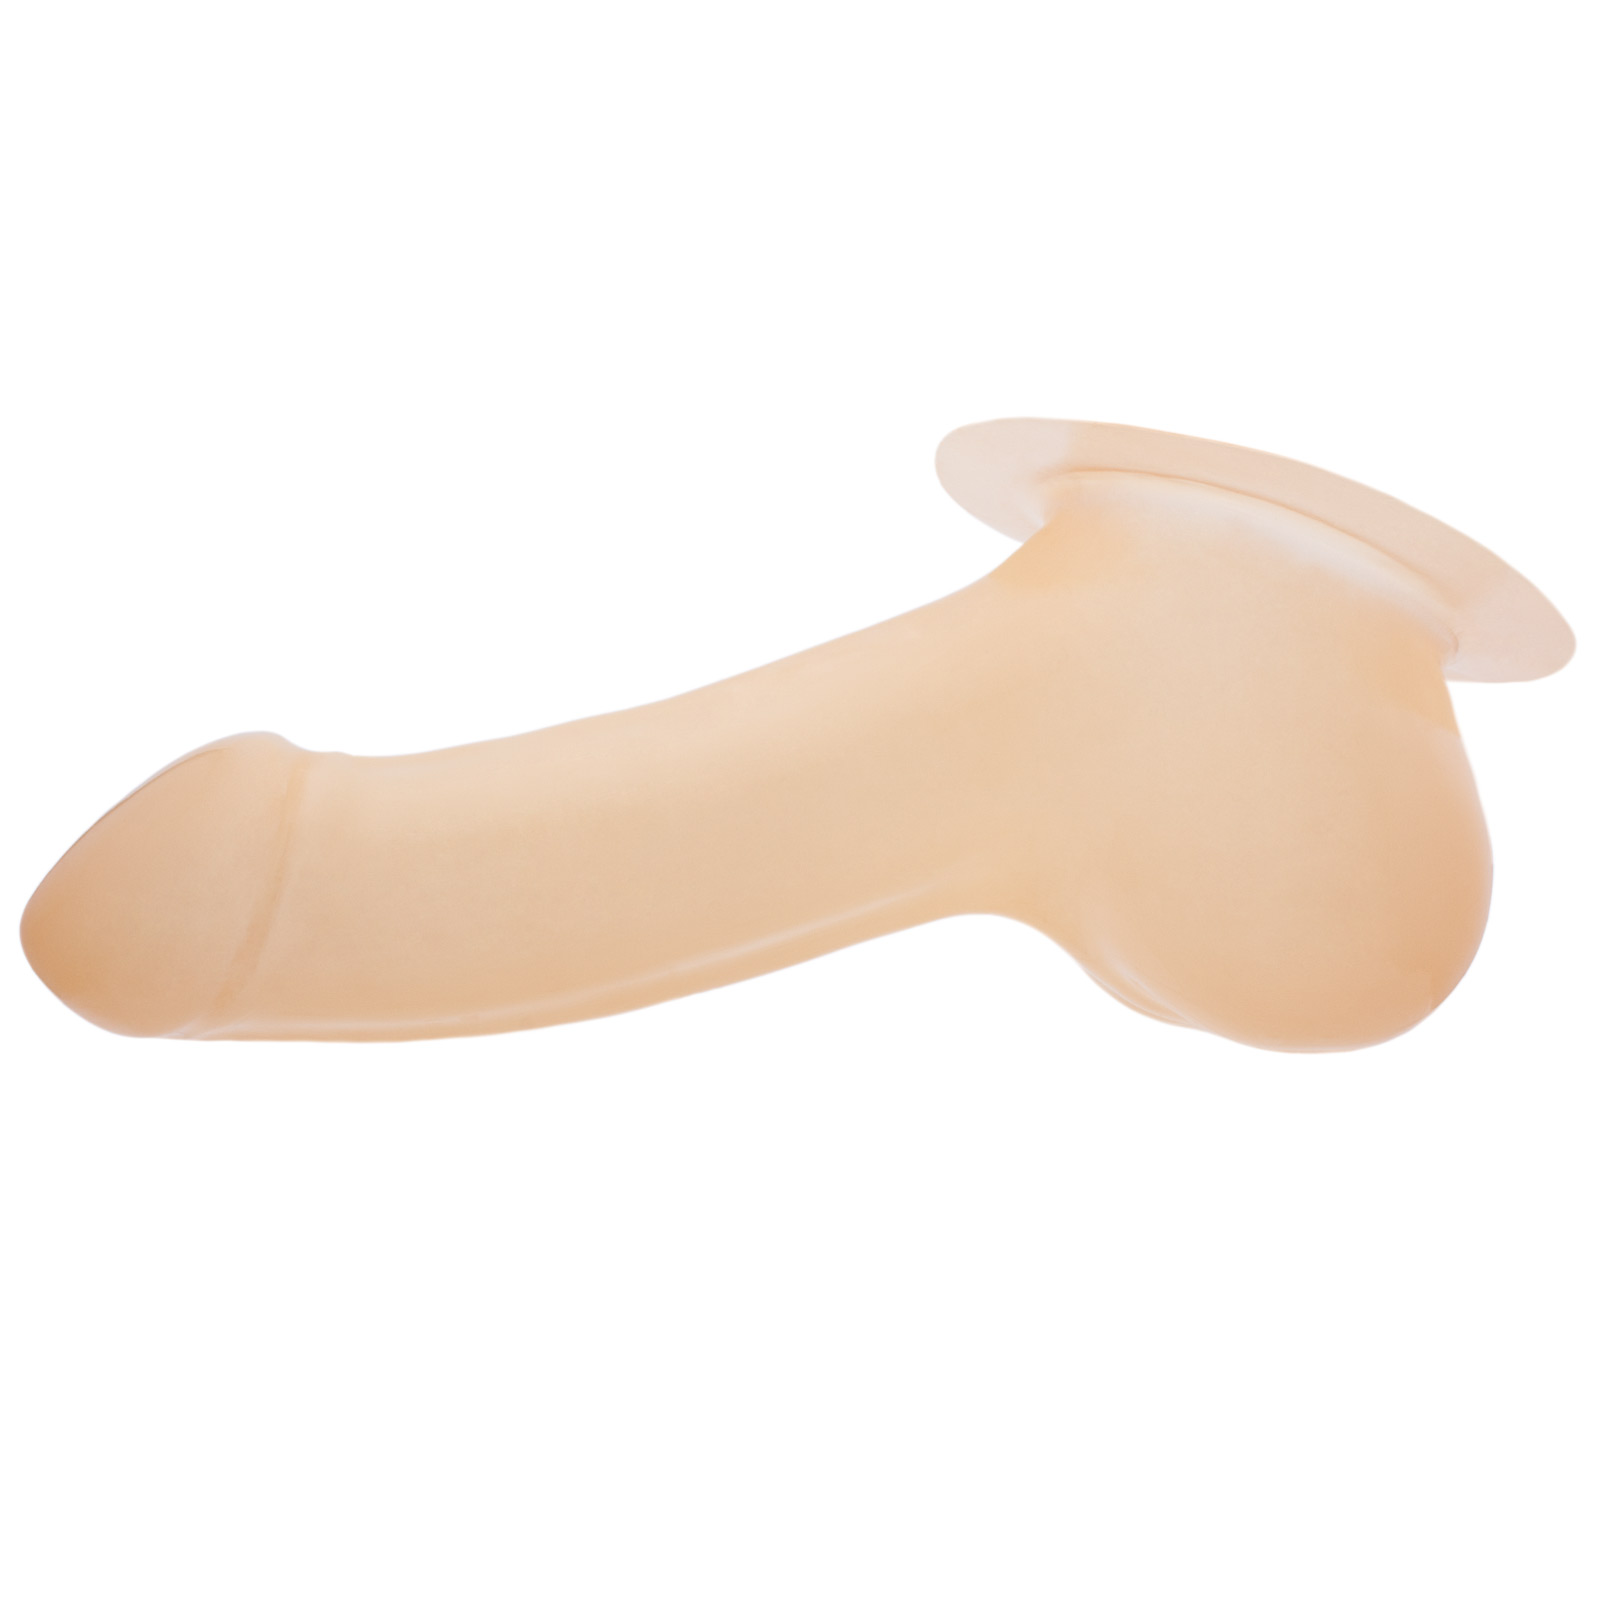 Toylie Latex Penis Sleeve «ADAM» semi-transparent, with base plate for sticking to latex clothing - suitable for vegans